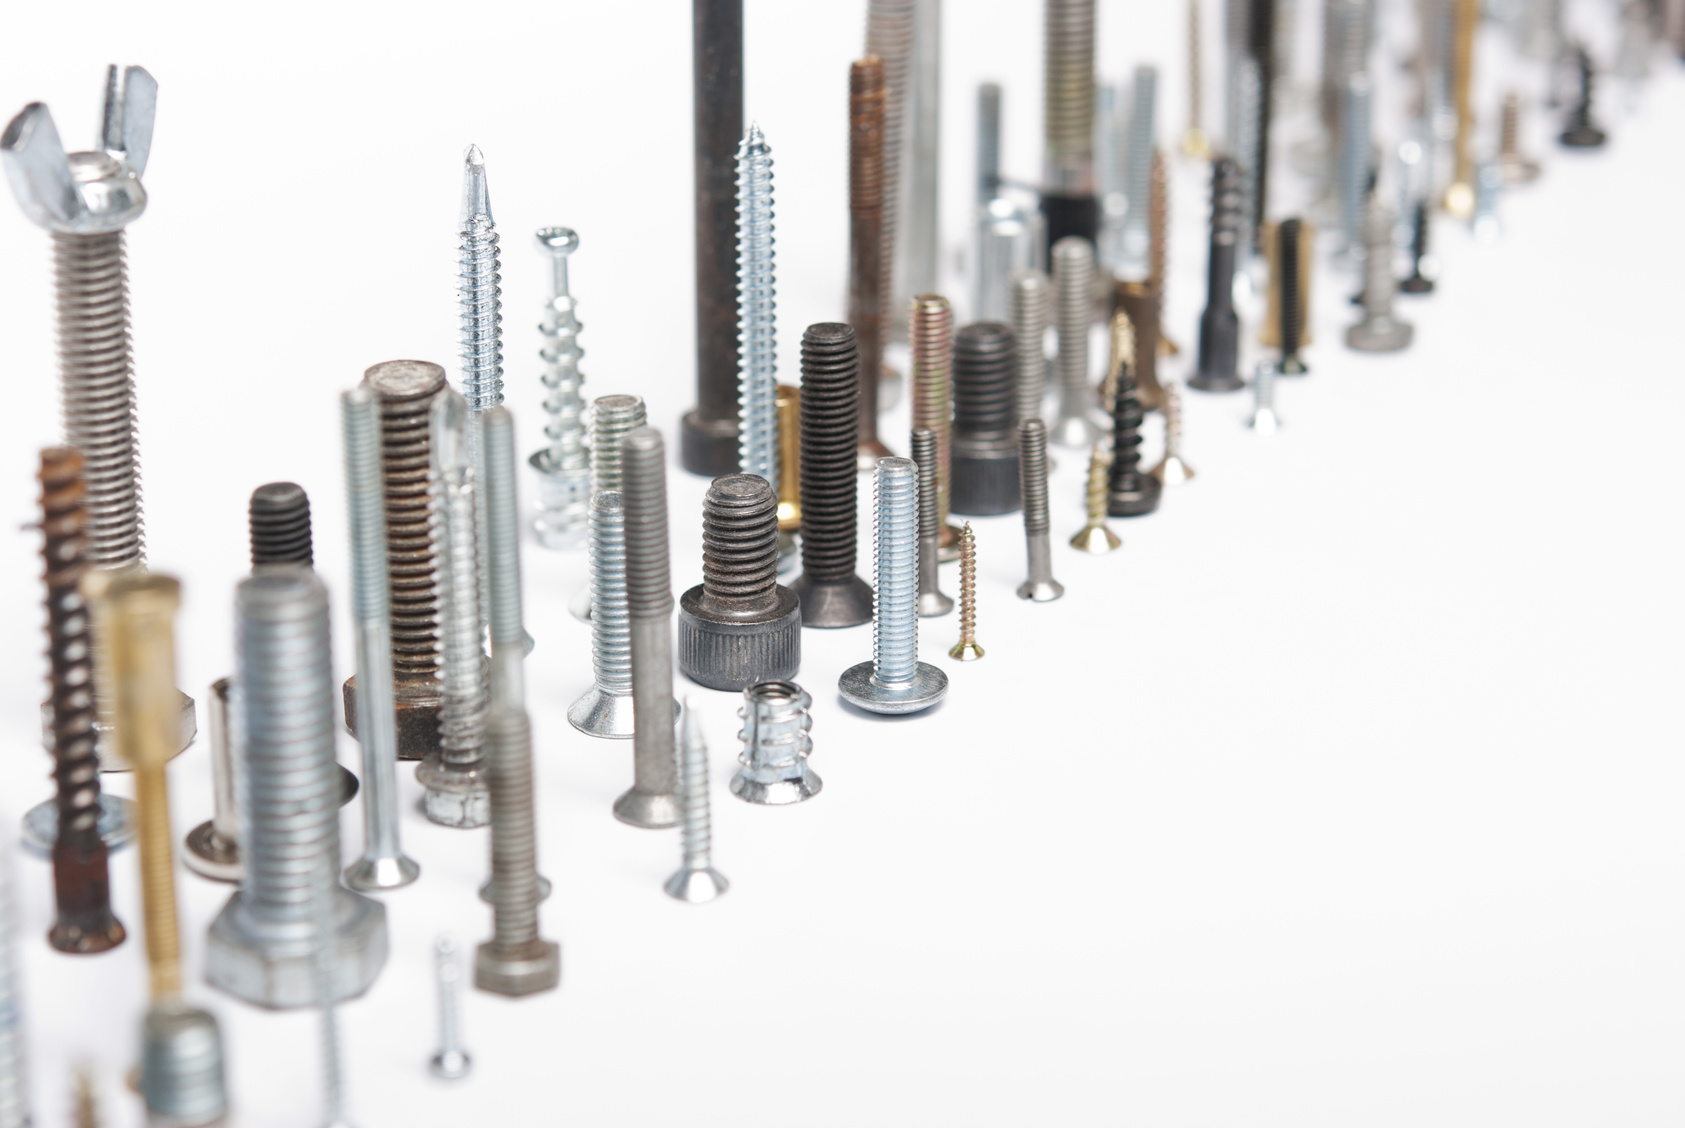 Many types of metal bolts.